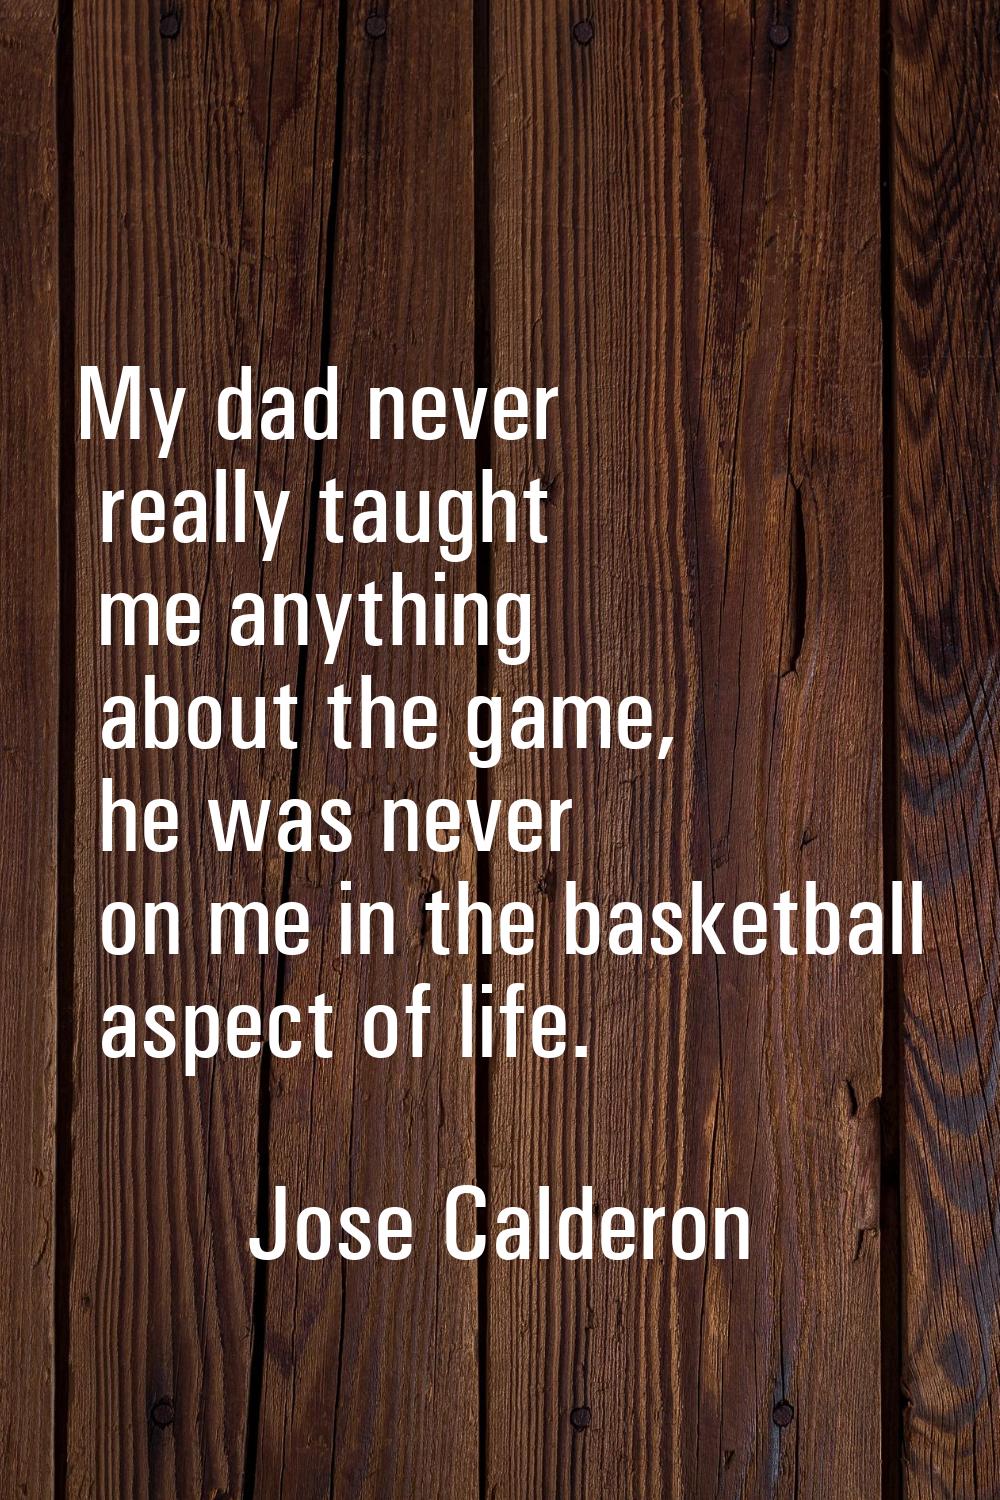 My dad never really taught me anything about the game, he was never on me in the basketball aspect 